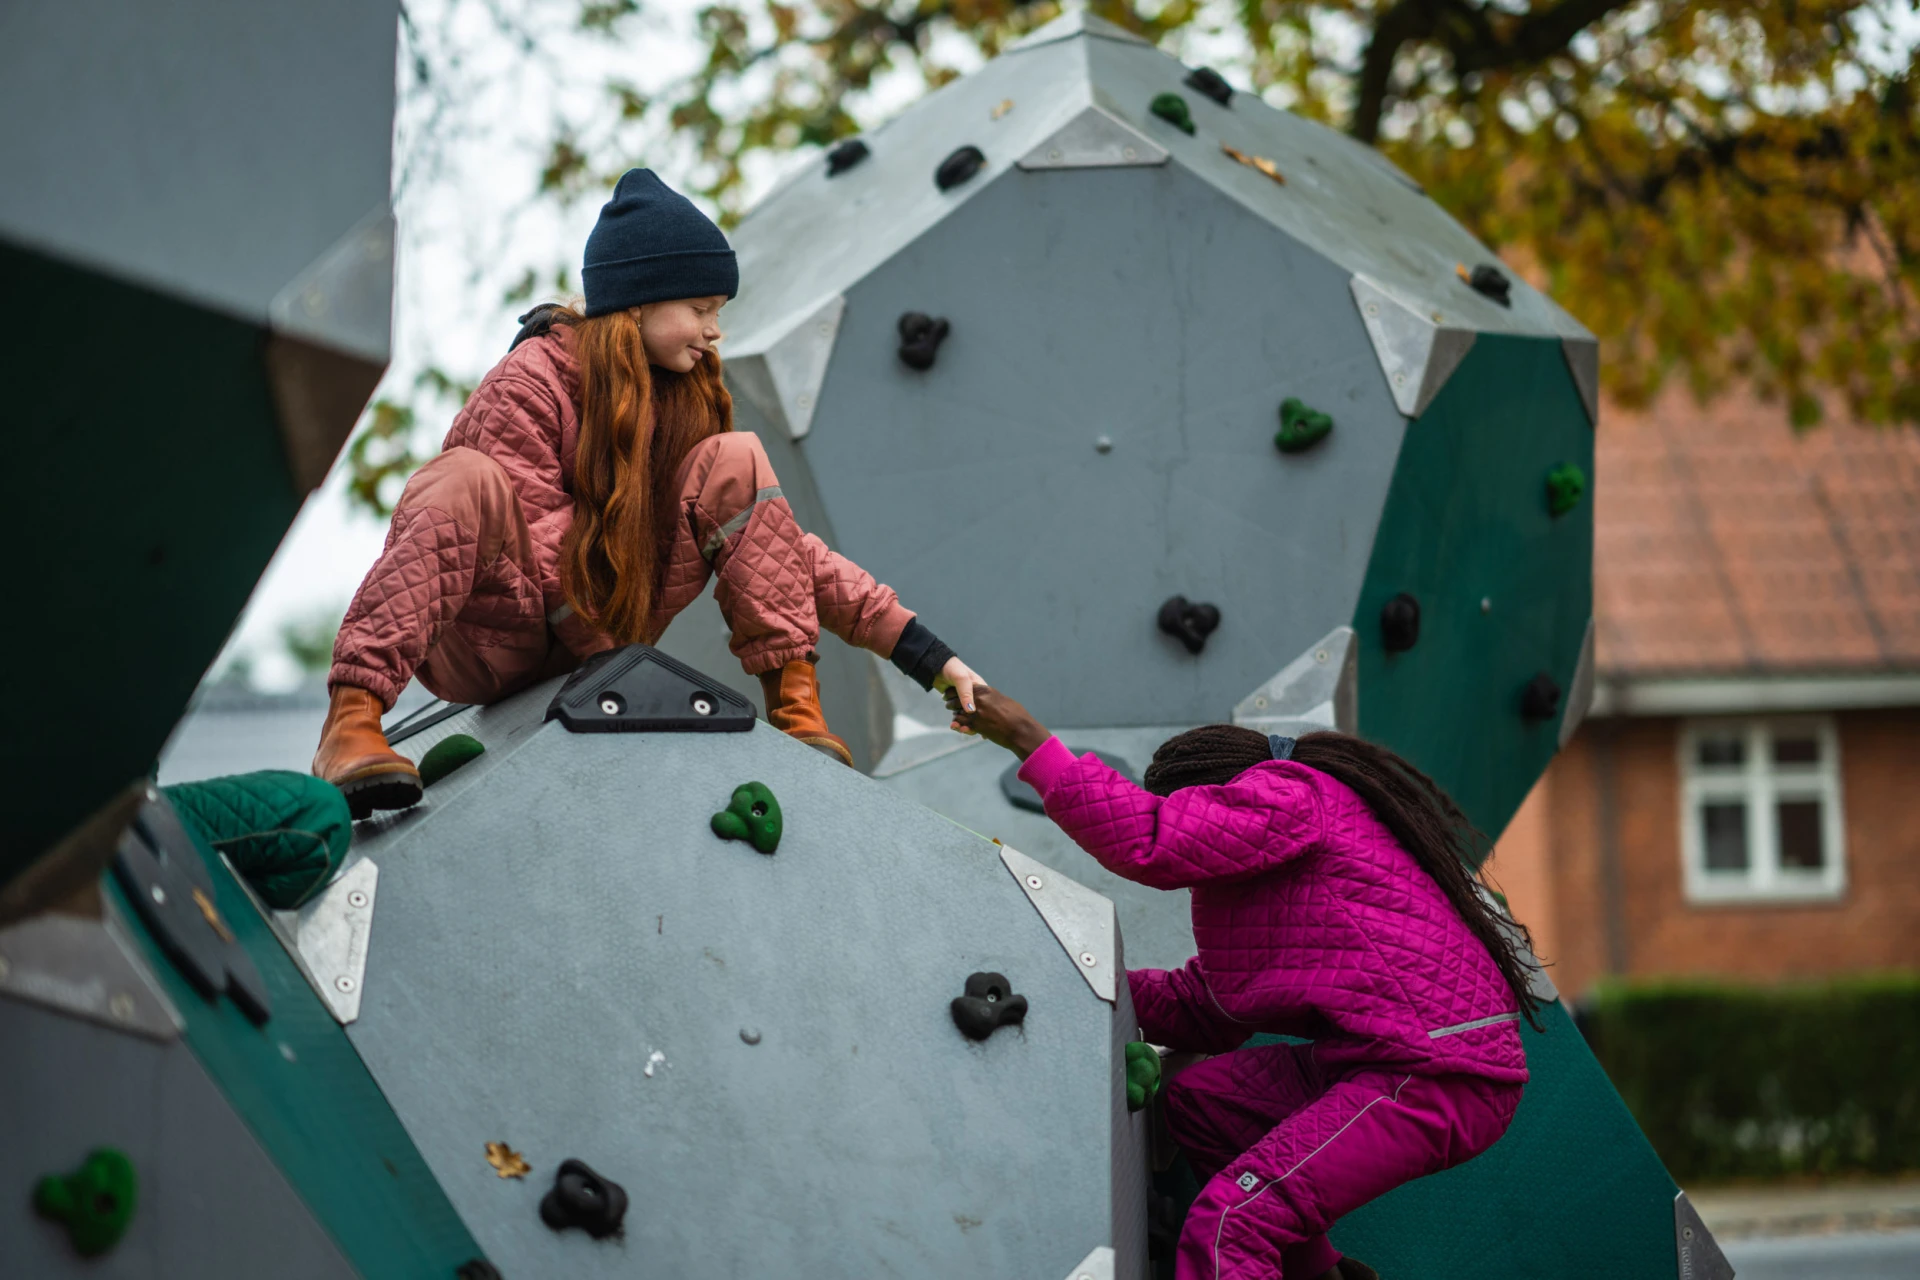 A girl helping another girl climbing up on a climbing structure on a playground